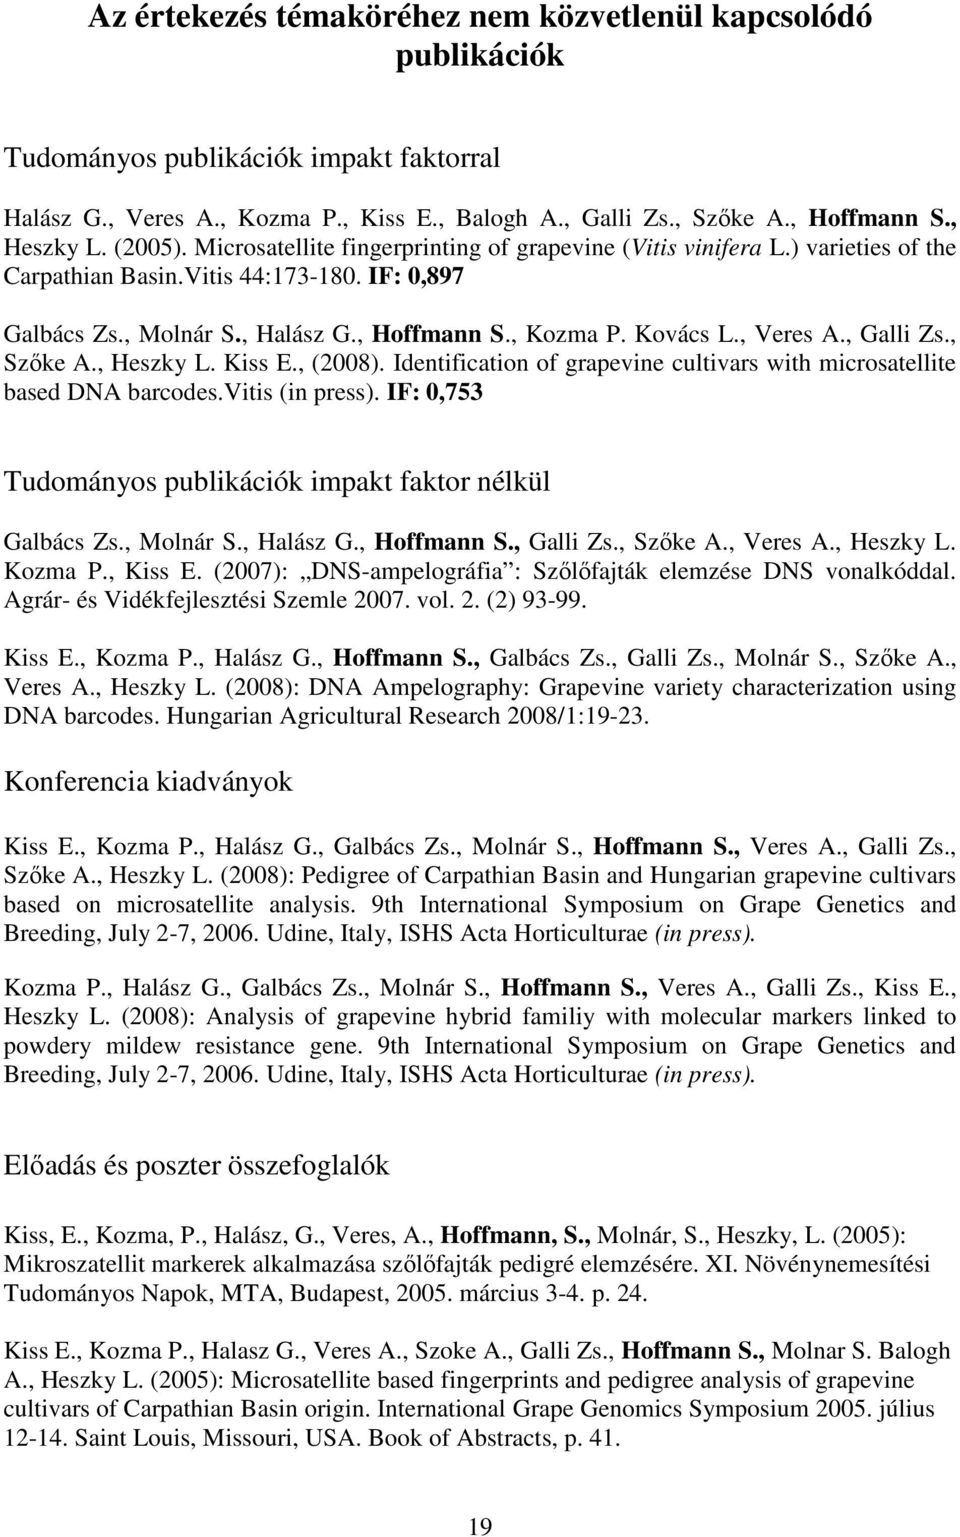 , Veres A., Galli Zs., Szıke A., Heszky L. Kiss E., (2008). Identification of grapevine cultivars with microsatellite based DNA barcodes.vitis (in press).